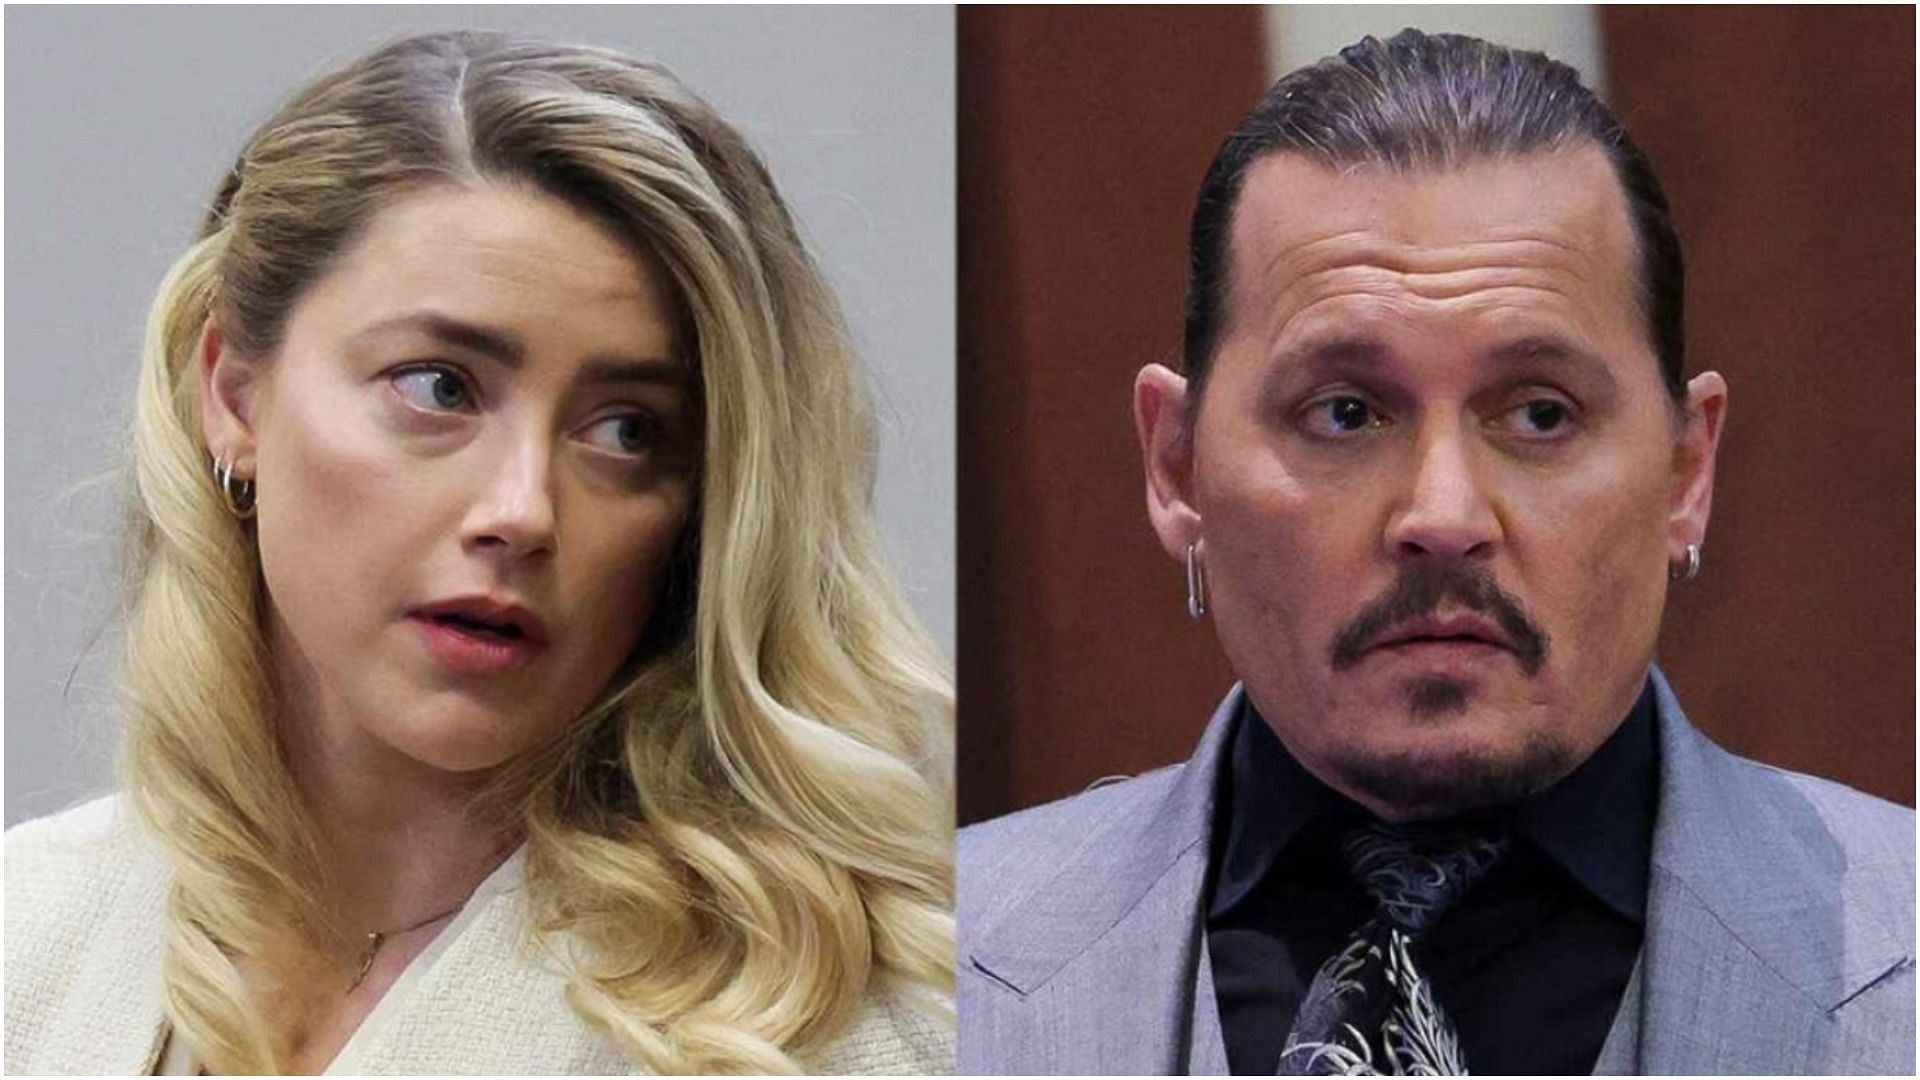 Amber Heard revealed in the ongoing trial that the knife she gifted her ex-husband Johnny Depp was a romantic gesture. (Image via E!/Instagram)